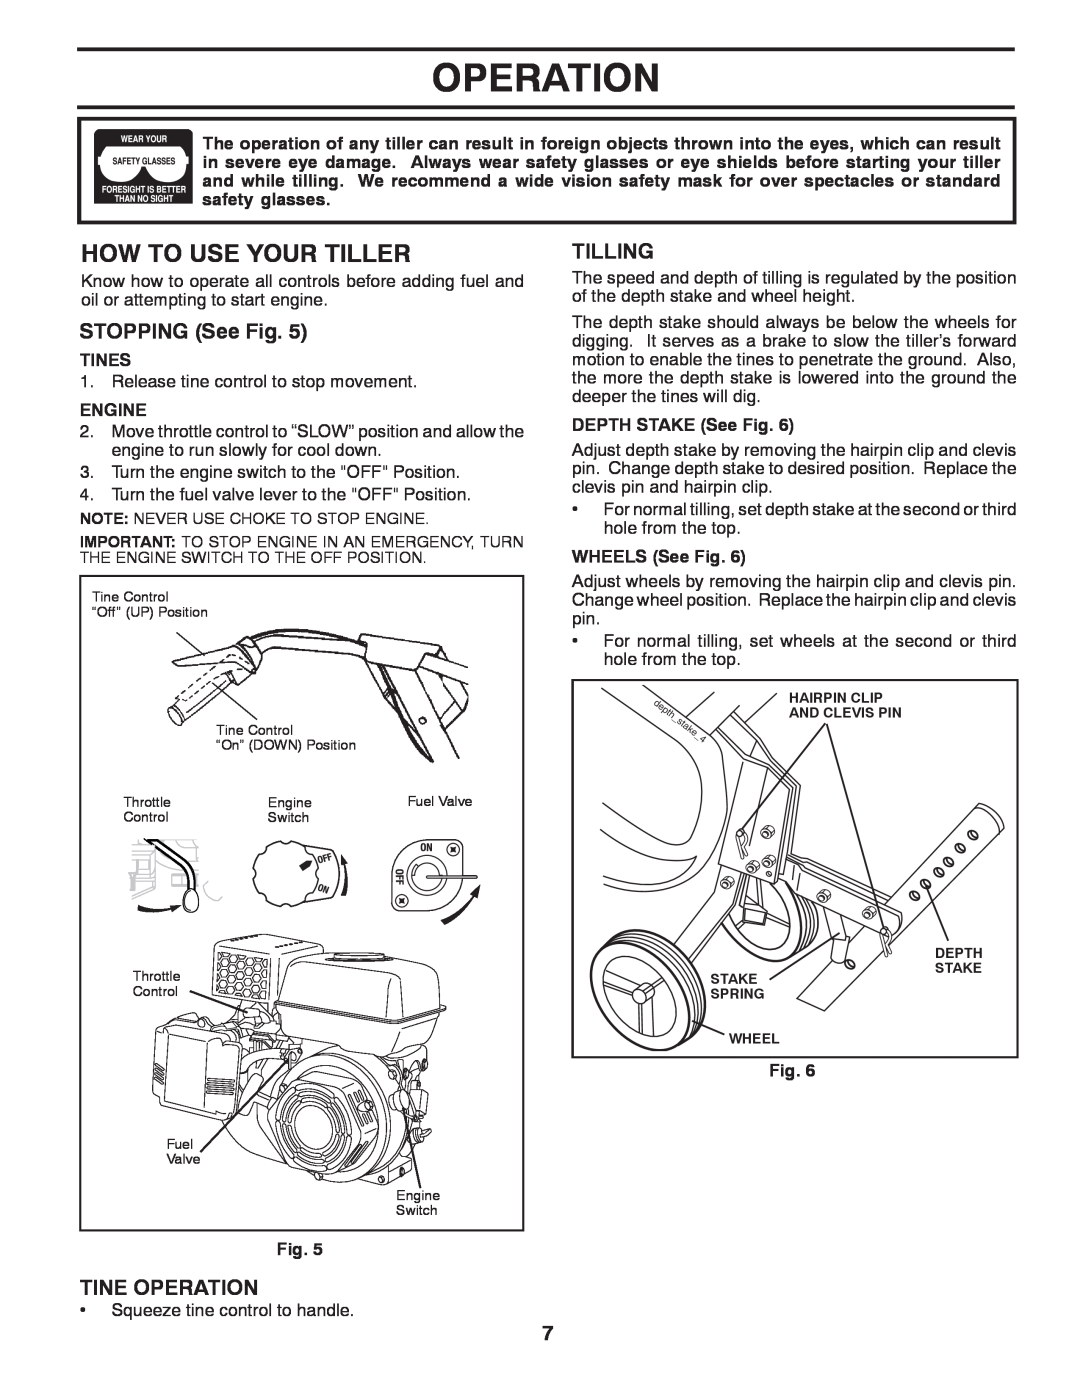 Poulan HDF900 manual How To Use Your Tiller, STOPPING See Fig, Tilling, Tines, Engine, DEPTH STAKE See Fig, WHEELS See Fig 